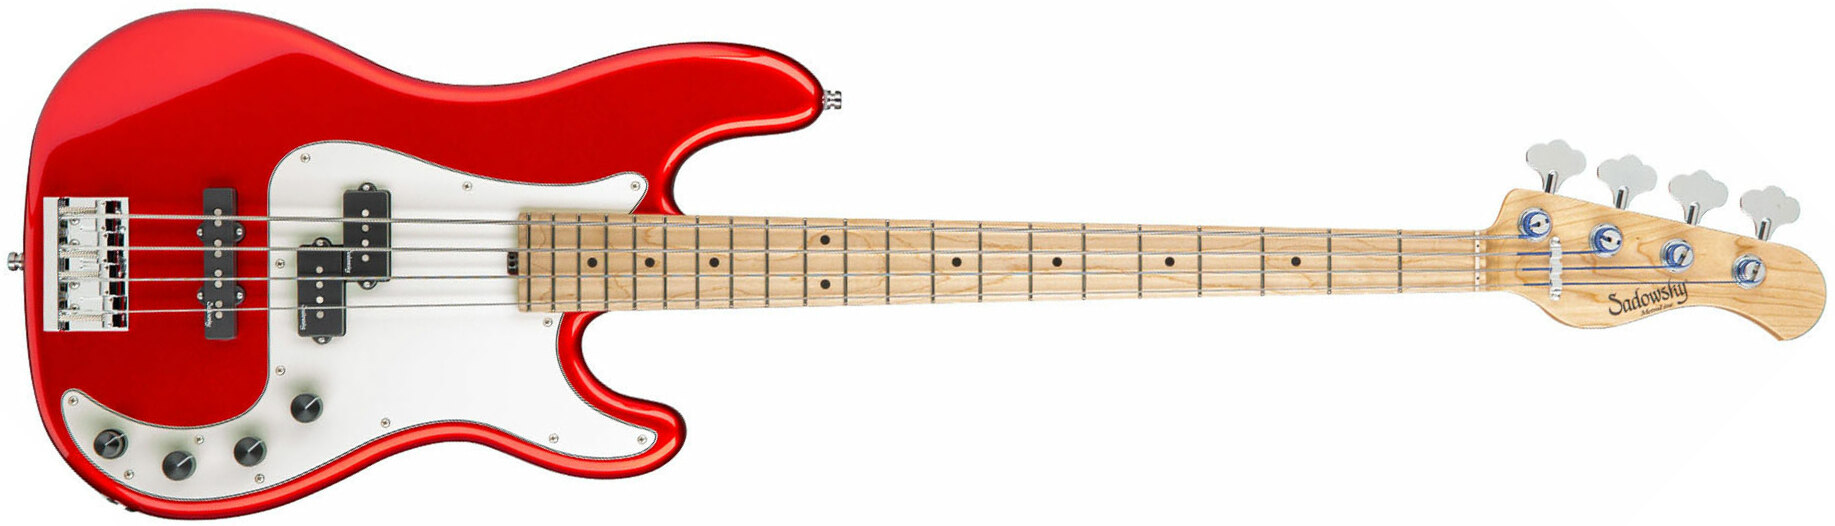 Sadowsky Hybrid P/j Bass 21 Fret Ash 4c Metroline All Active Mn - Solid Candy Apple Red - Solidbody E-bass - Main picture